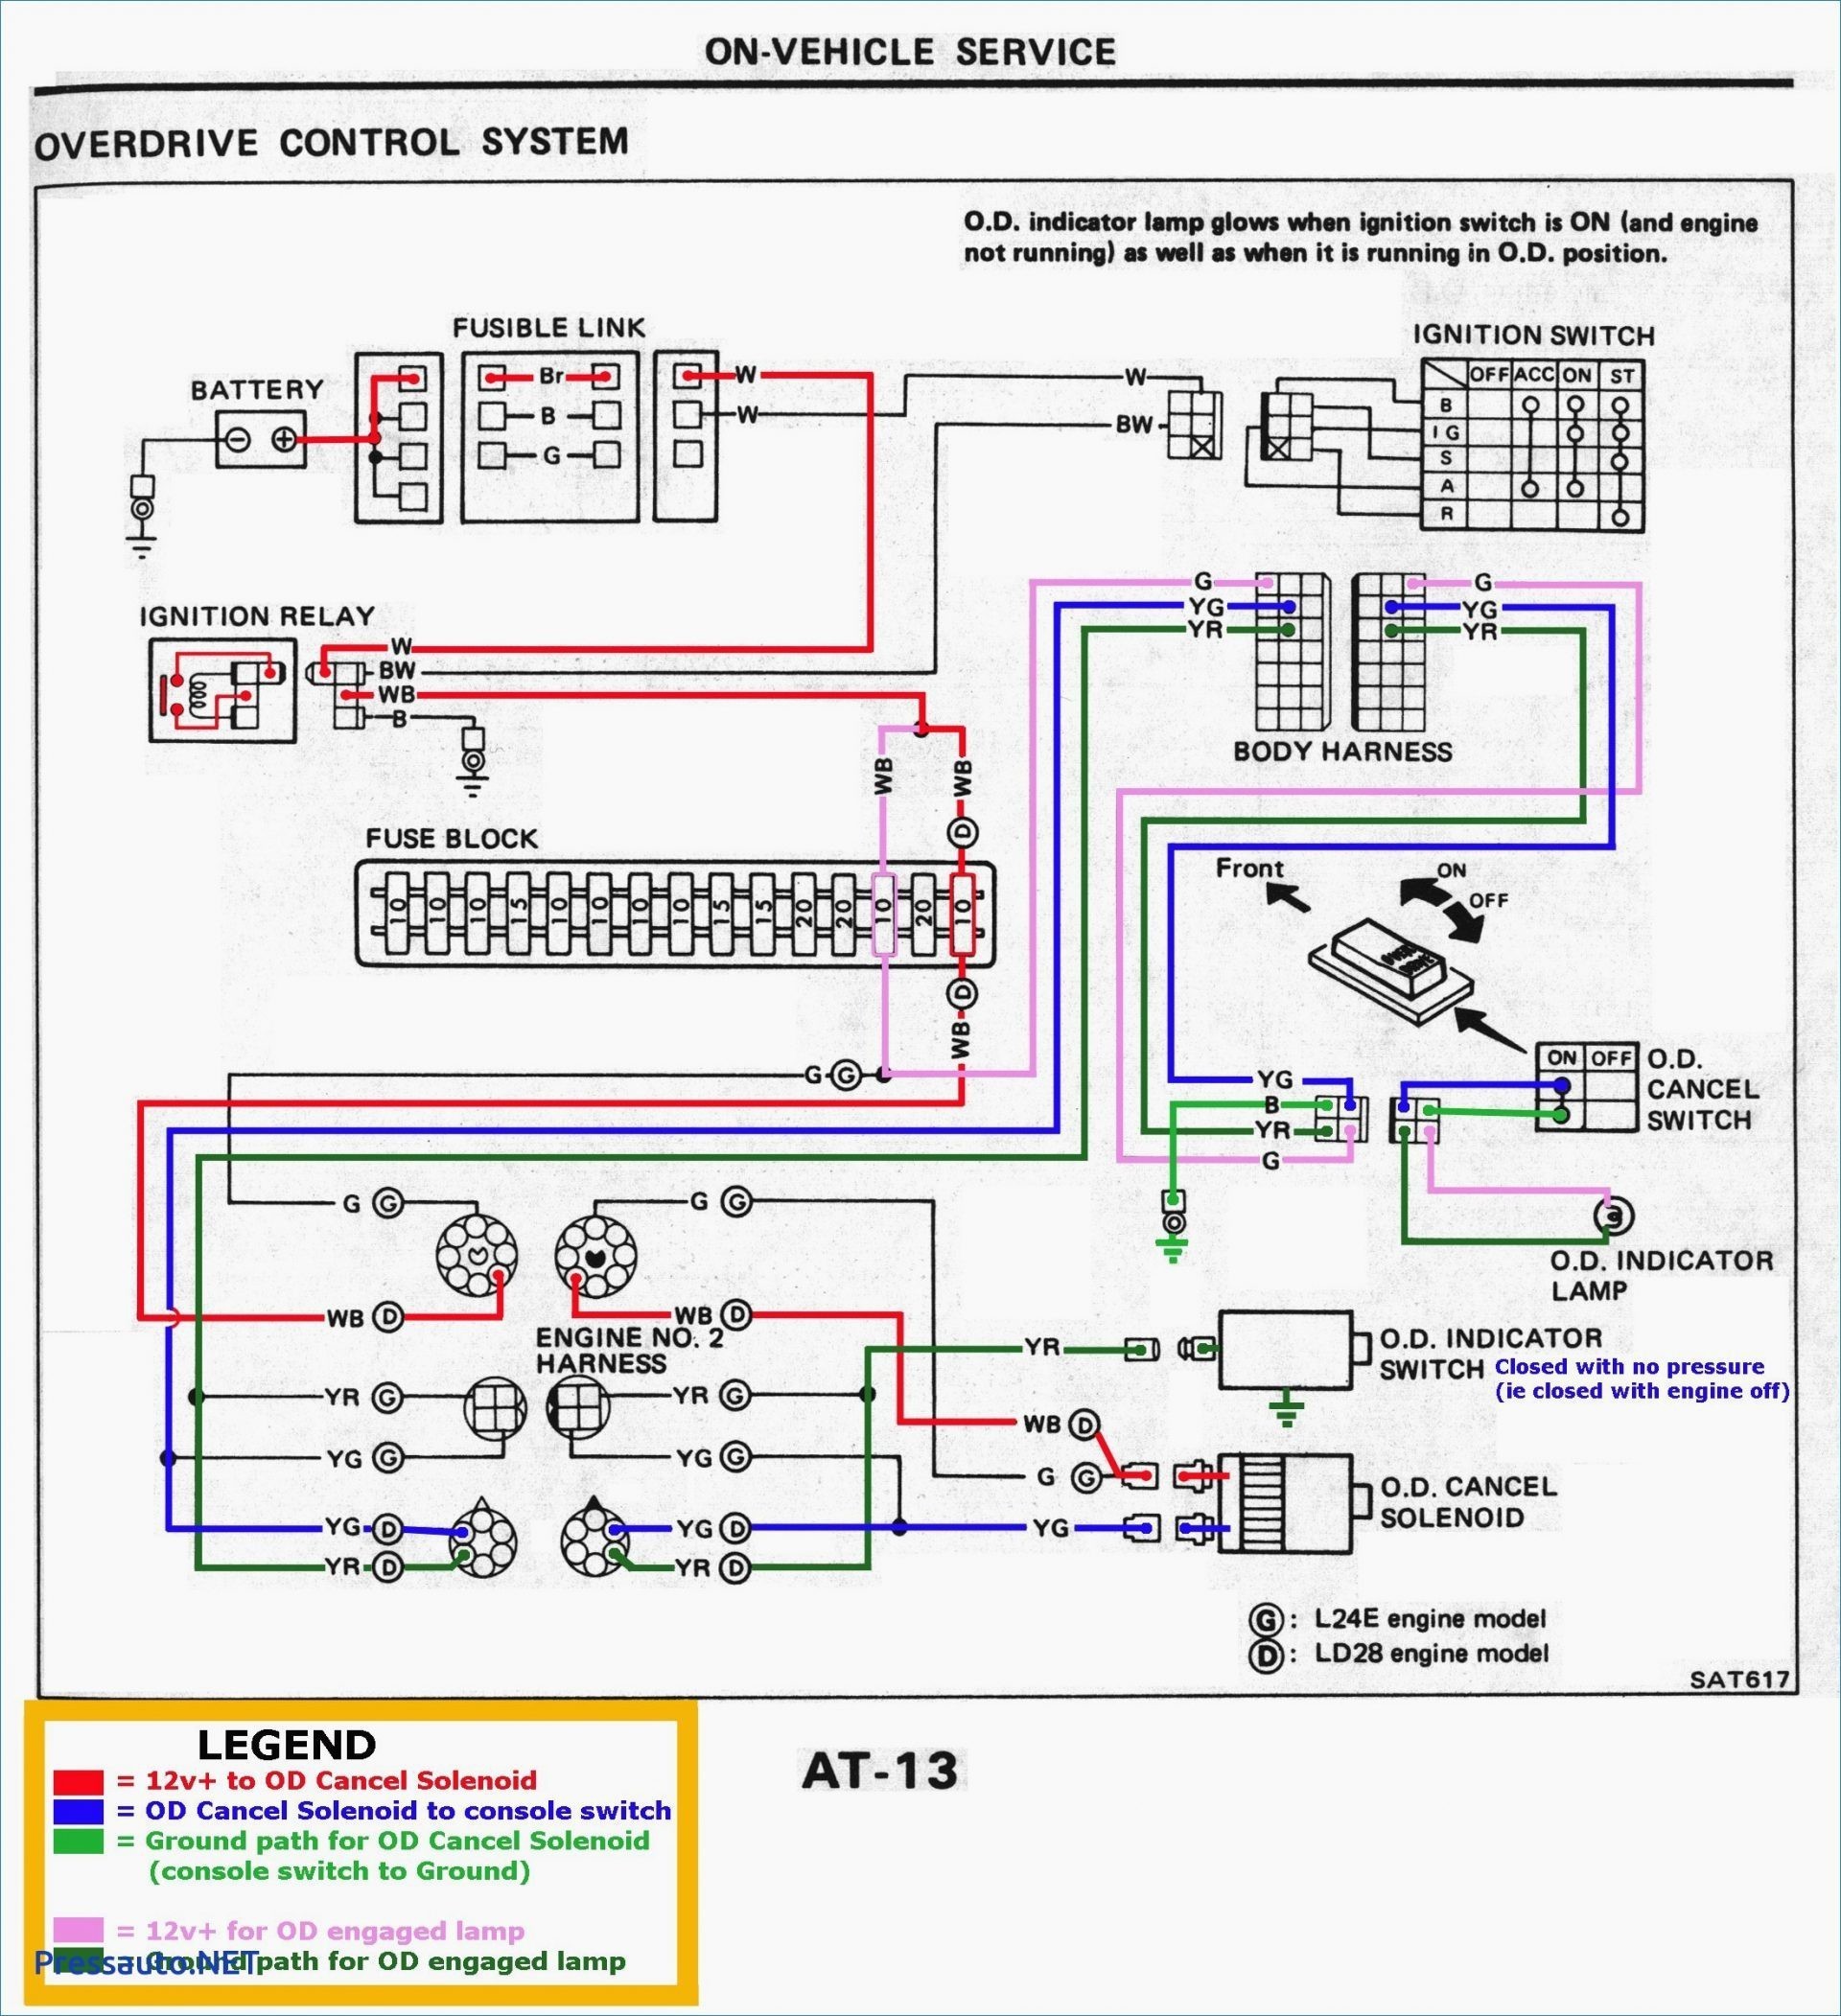 Inverter Wiring Diagram In House Valid Alternator Demo Wiring Connection to Battery Capacitors Inverter